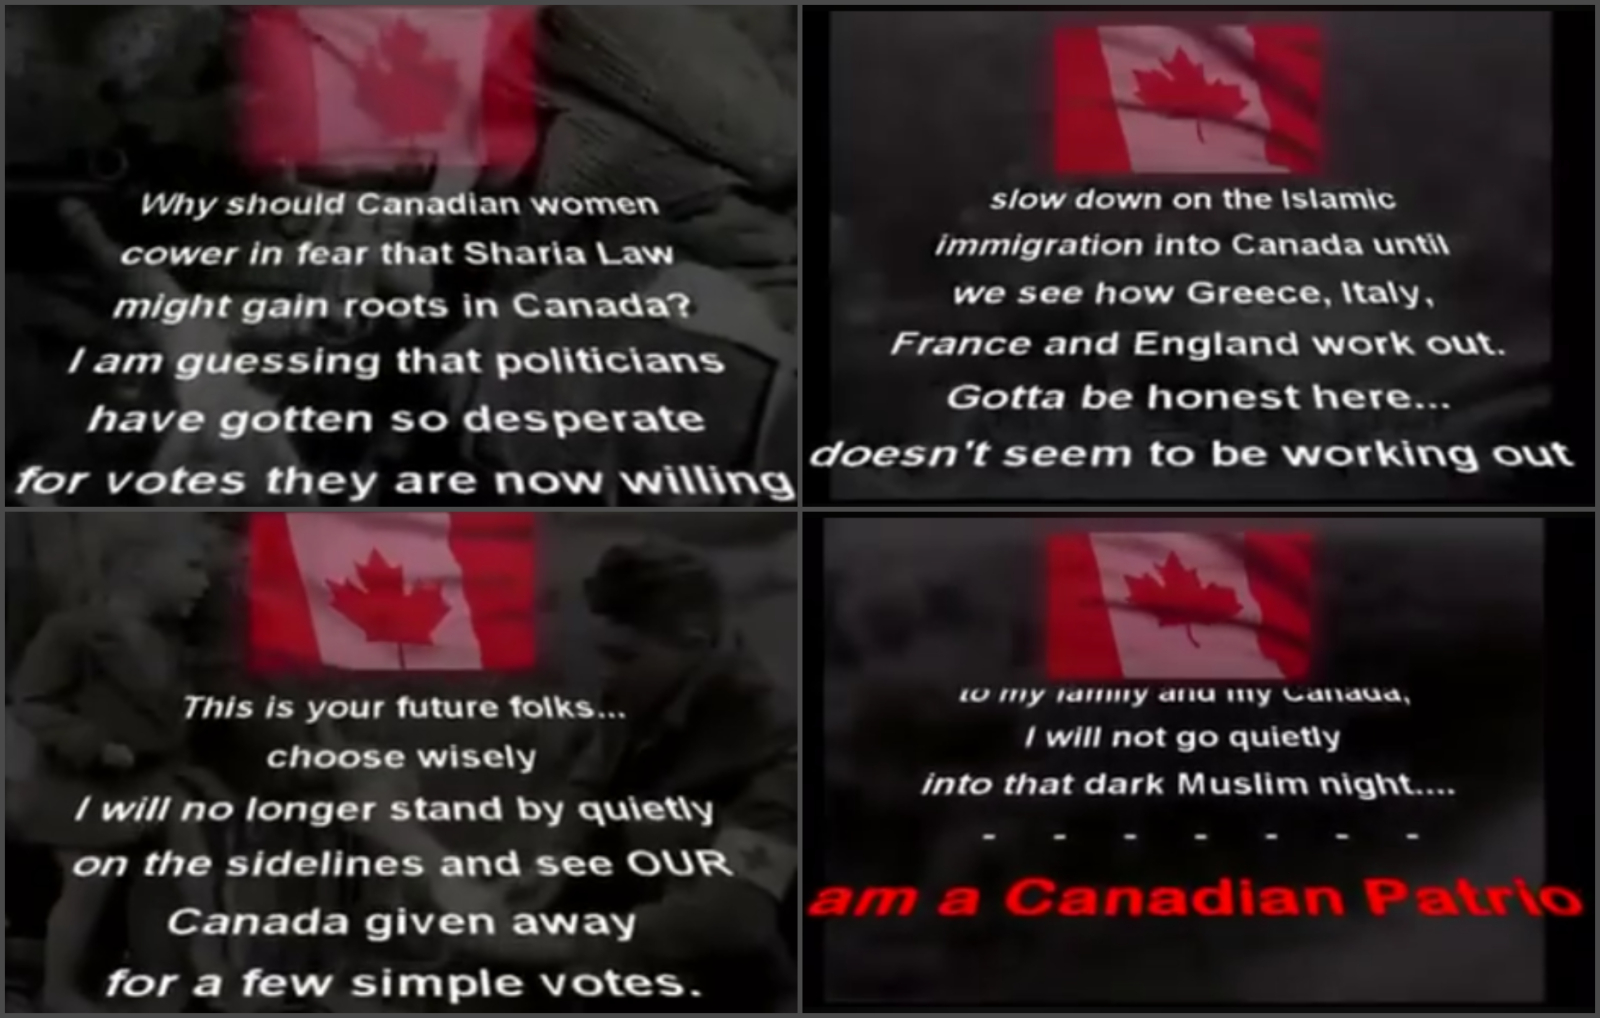 National Conservative News Network Canada Facebook Page Islamophobic Video Still Images